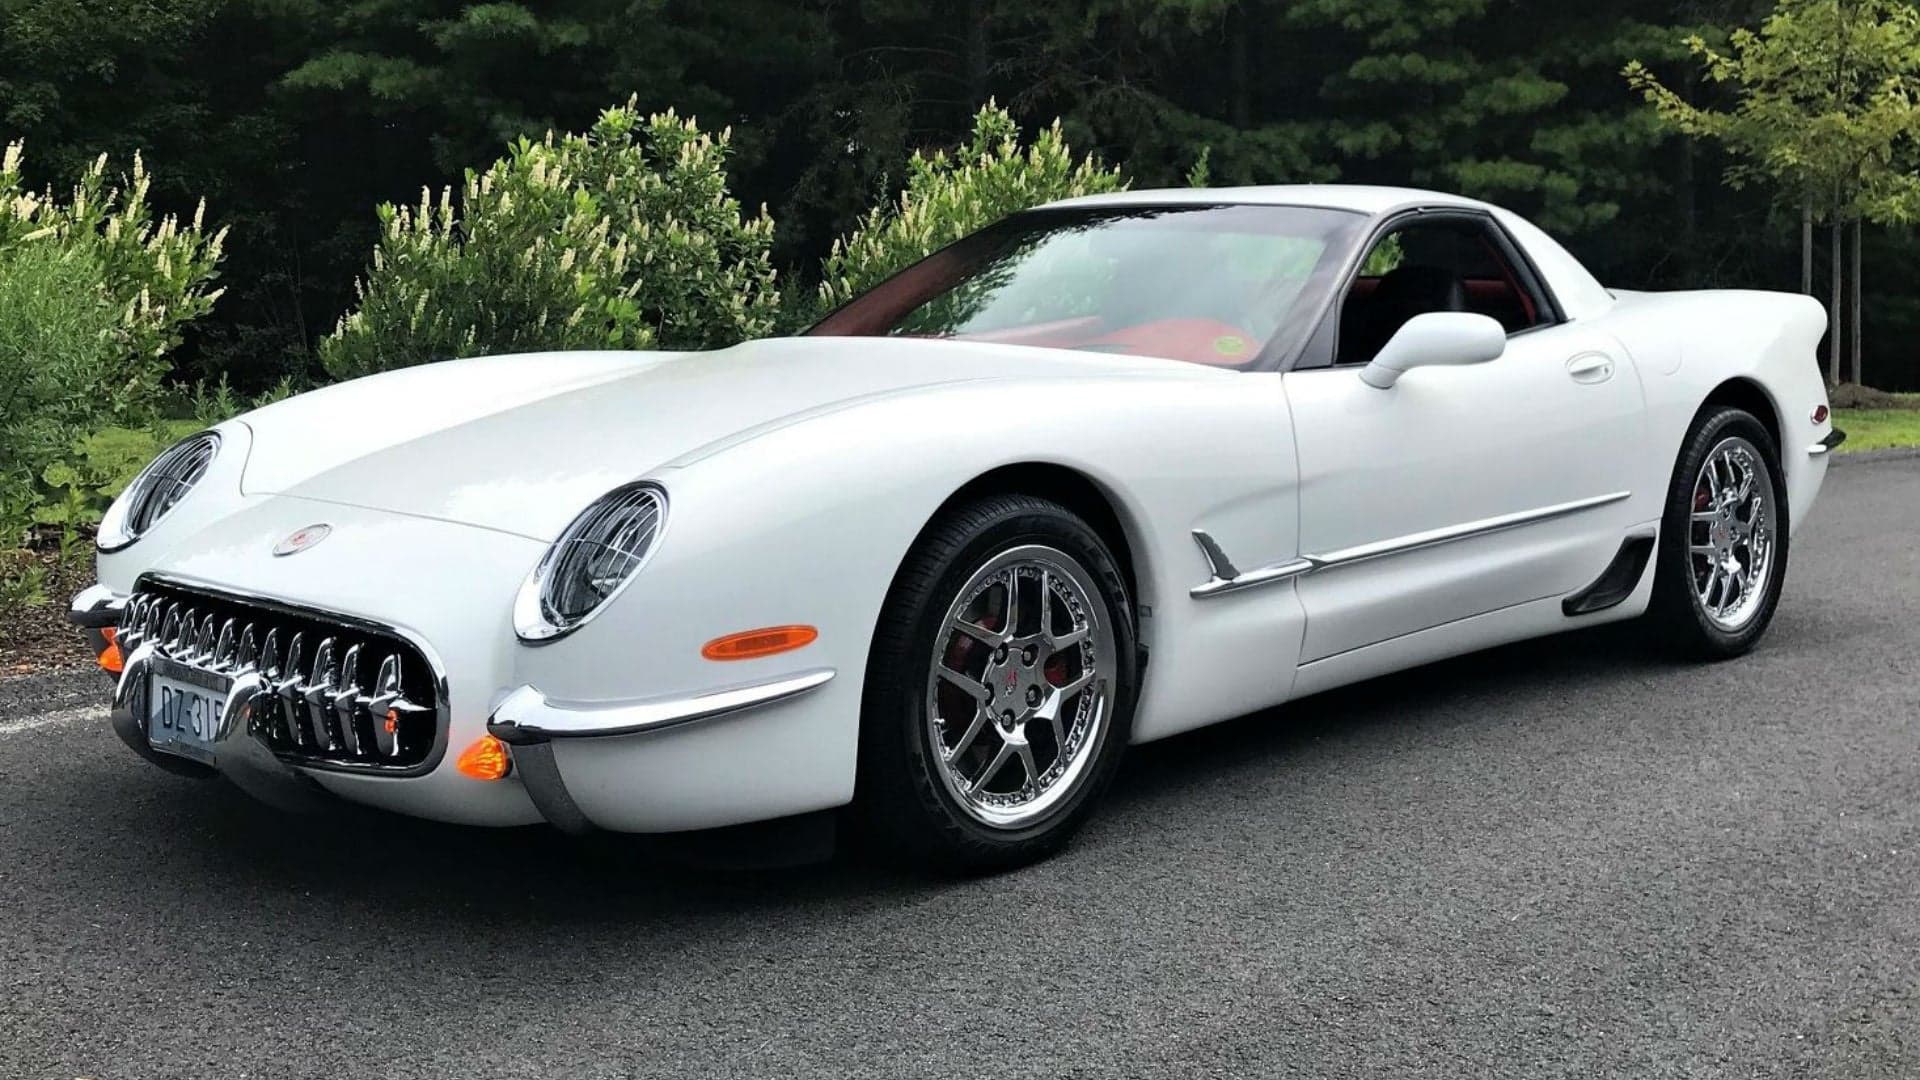 Retro-Styled 2004 Chevrolet Corvette Z06 Is a Questionable Throwback to Yesteryear